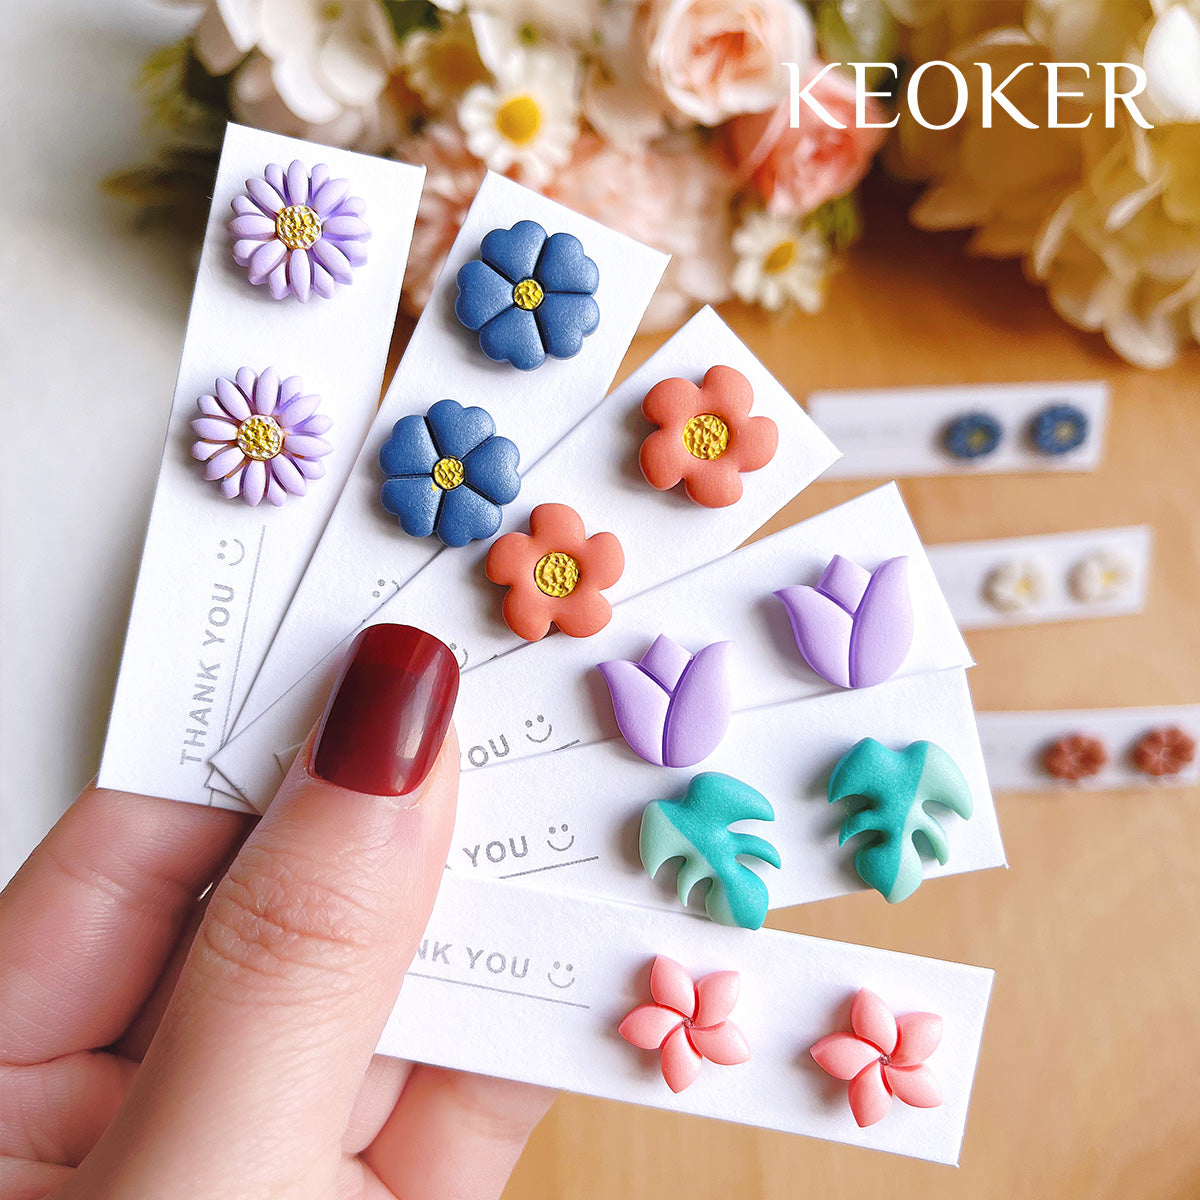 KEOKER Polymer Clay Cutters, Summer Clay Cutters, Polymer Clay Cutters for  Earrings Jewelry Making, 12 Shapes Flower Clay Earrings Cutters 